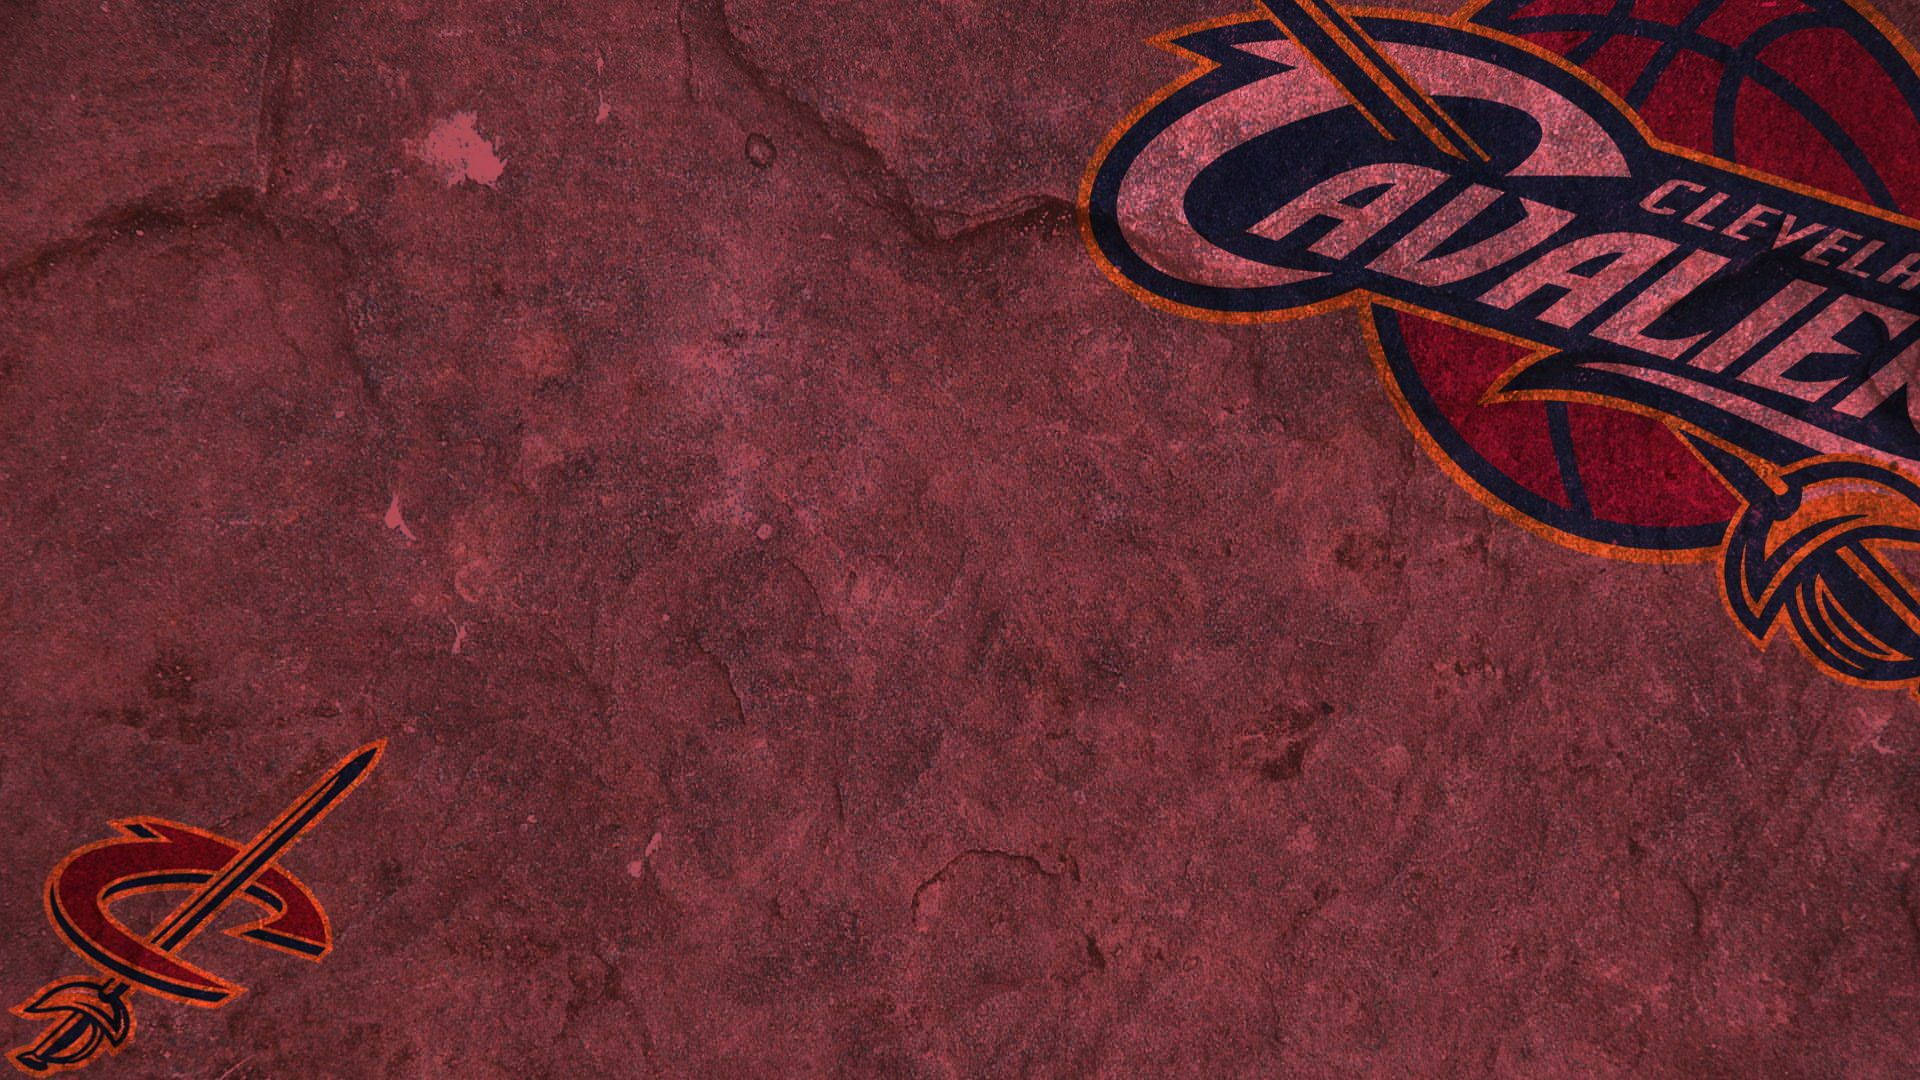 Cleveland Cavaliers Monochromatic Red Poster Background